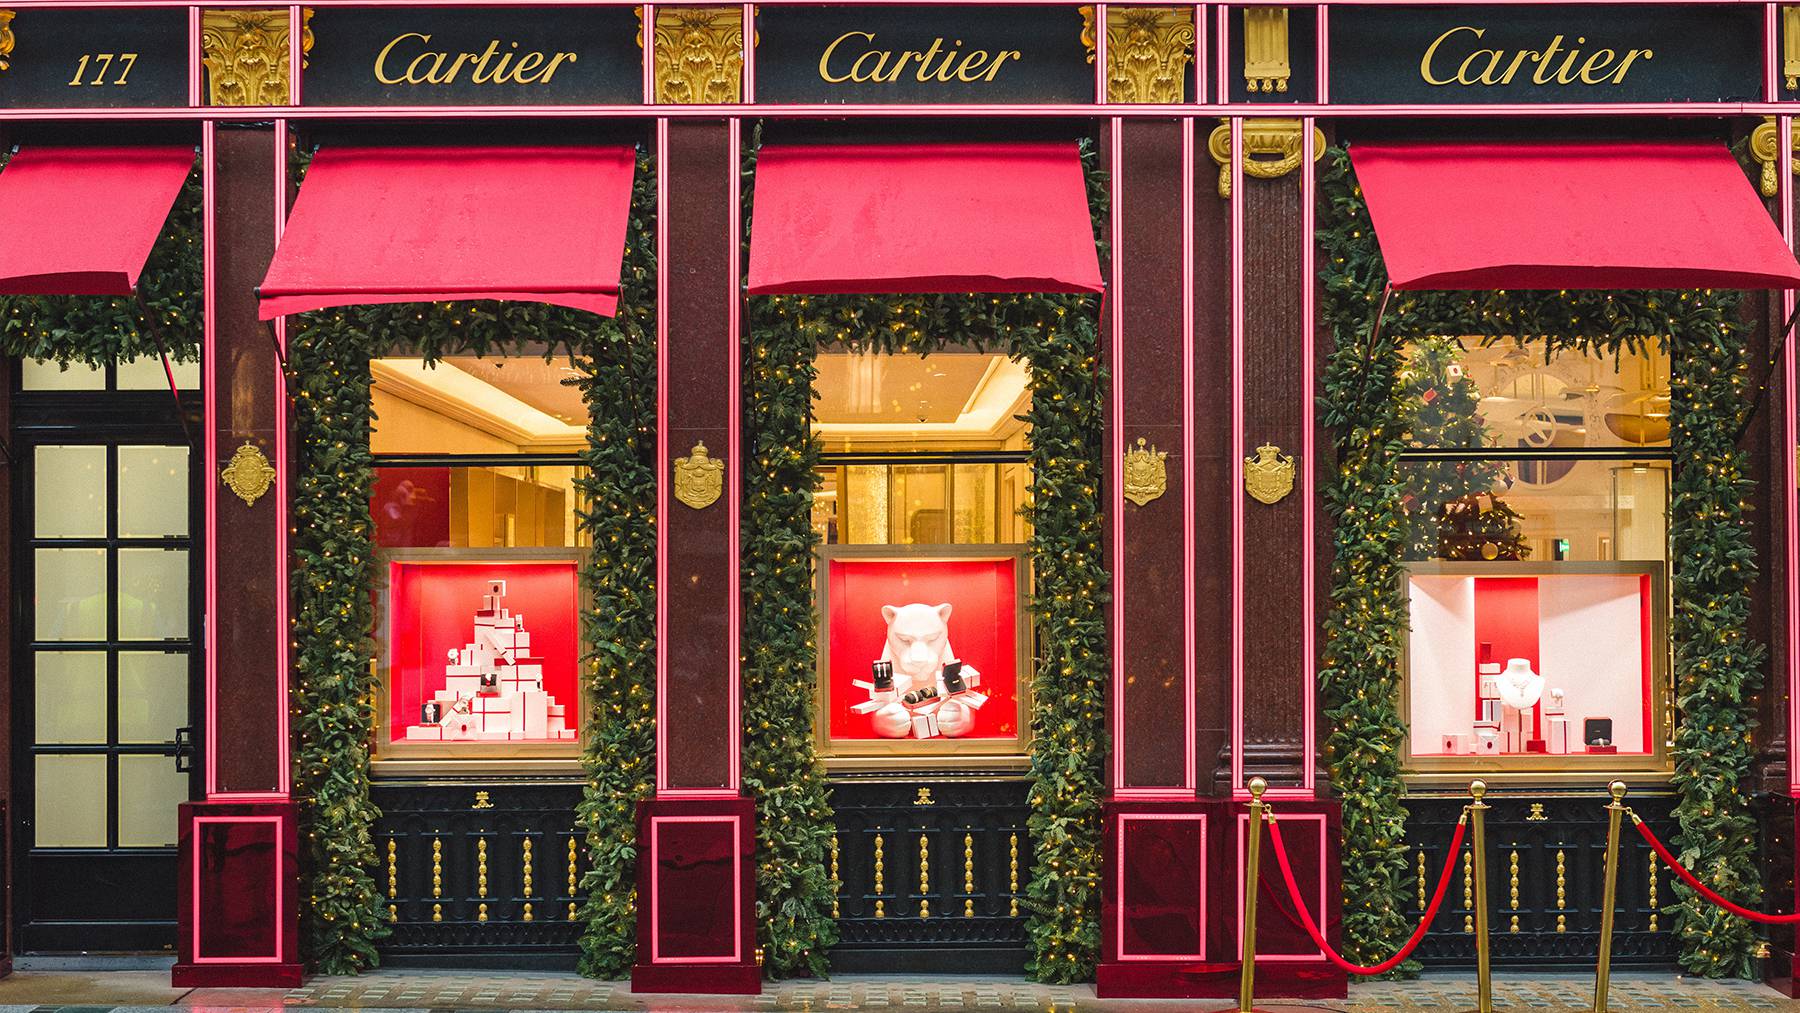 The exterior of a Cartier store showcasing jewels in the window display and the stores signage at the top.